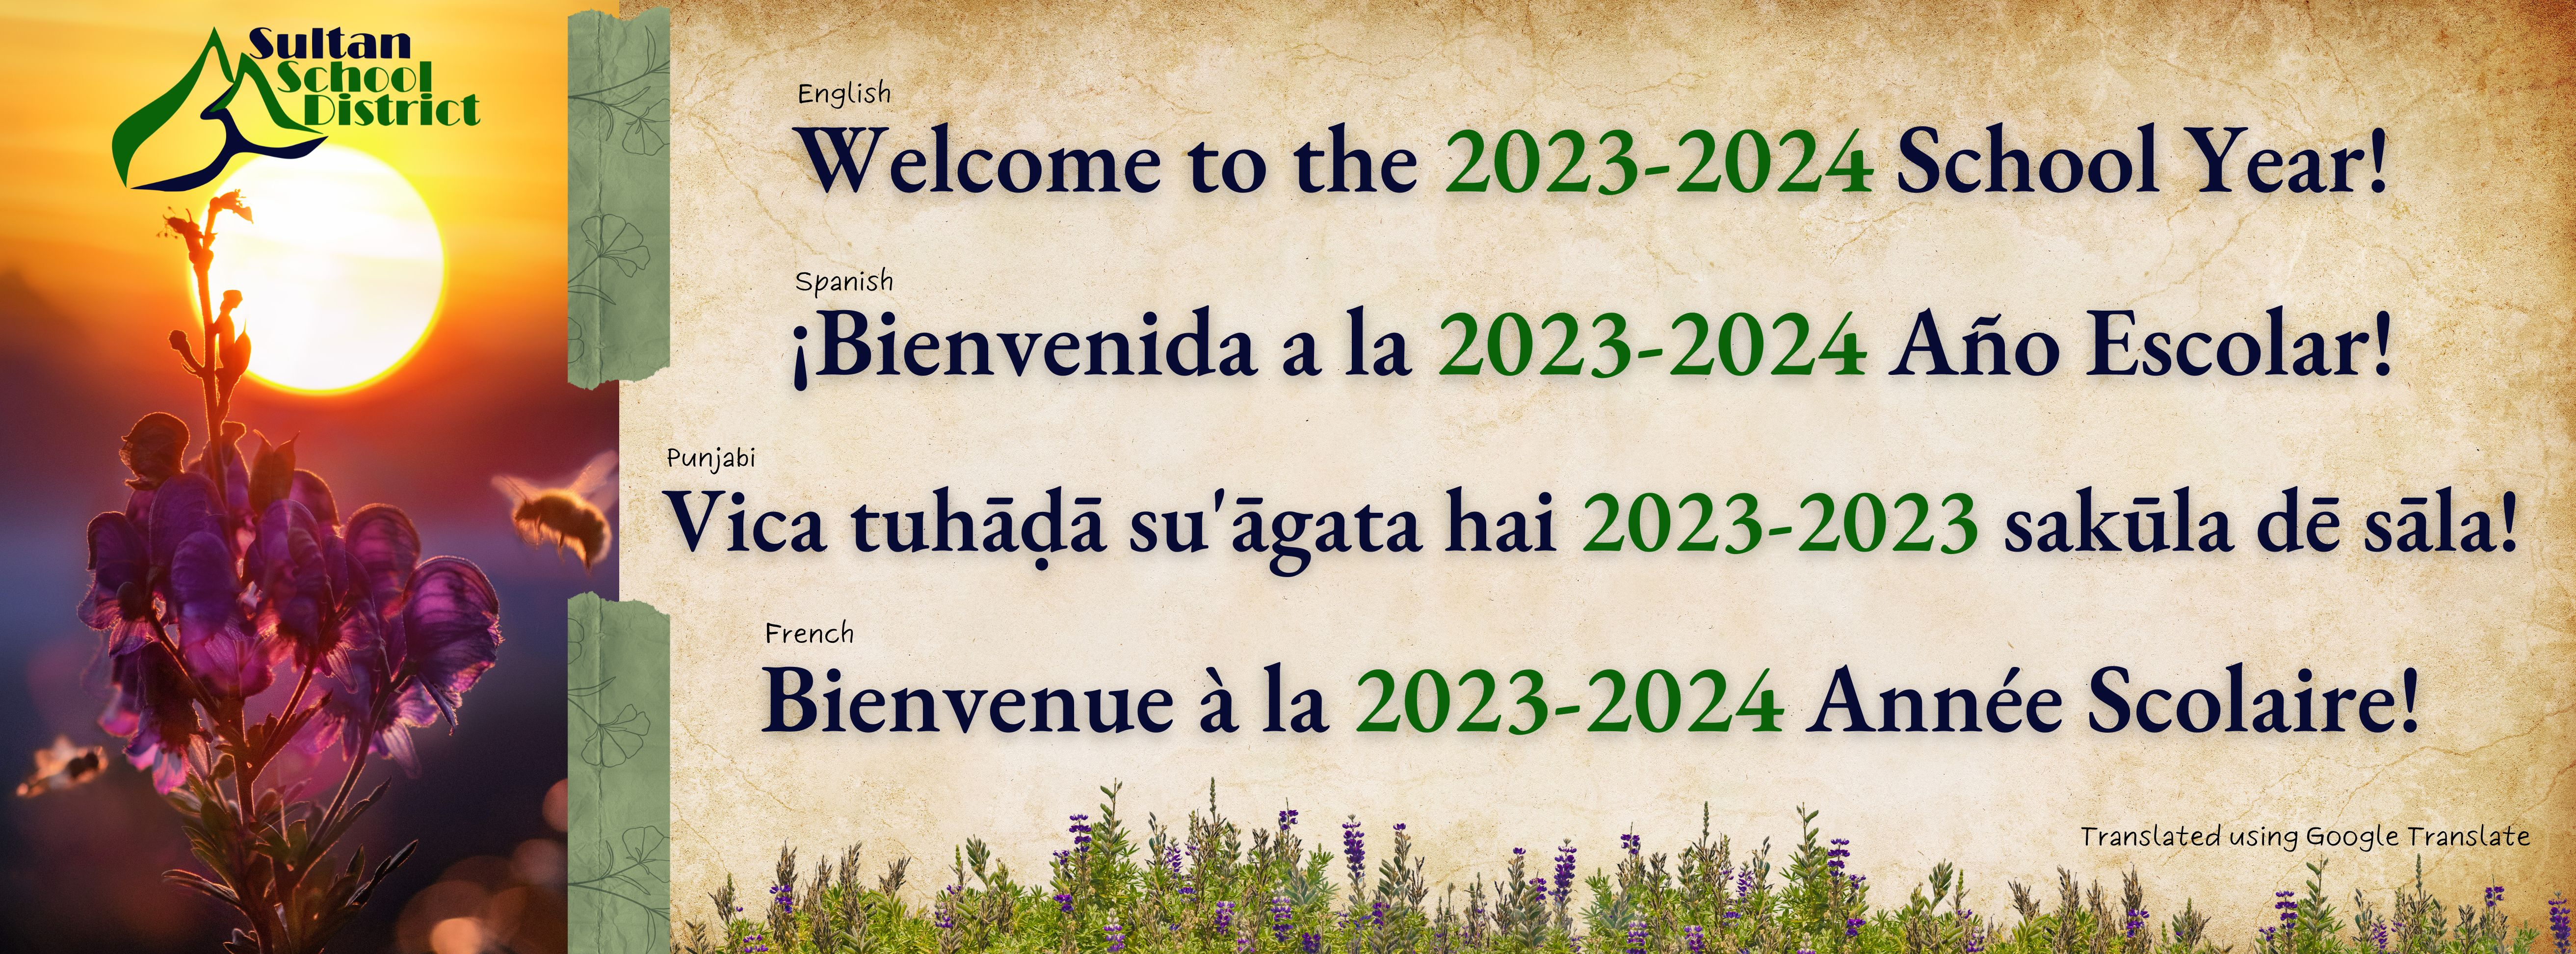 Welcome to the 2023-2024 school year!